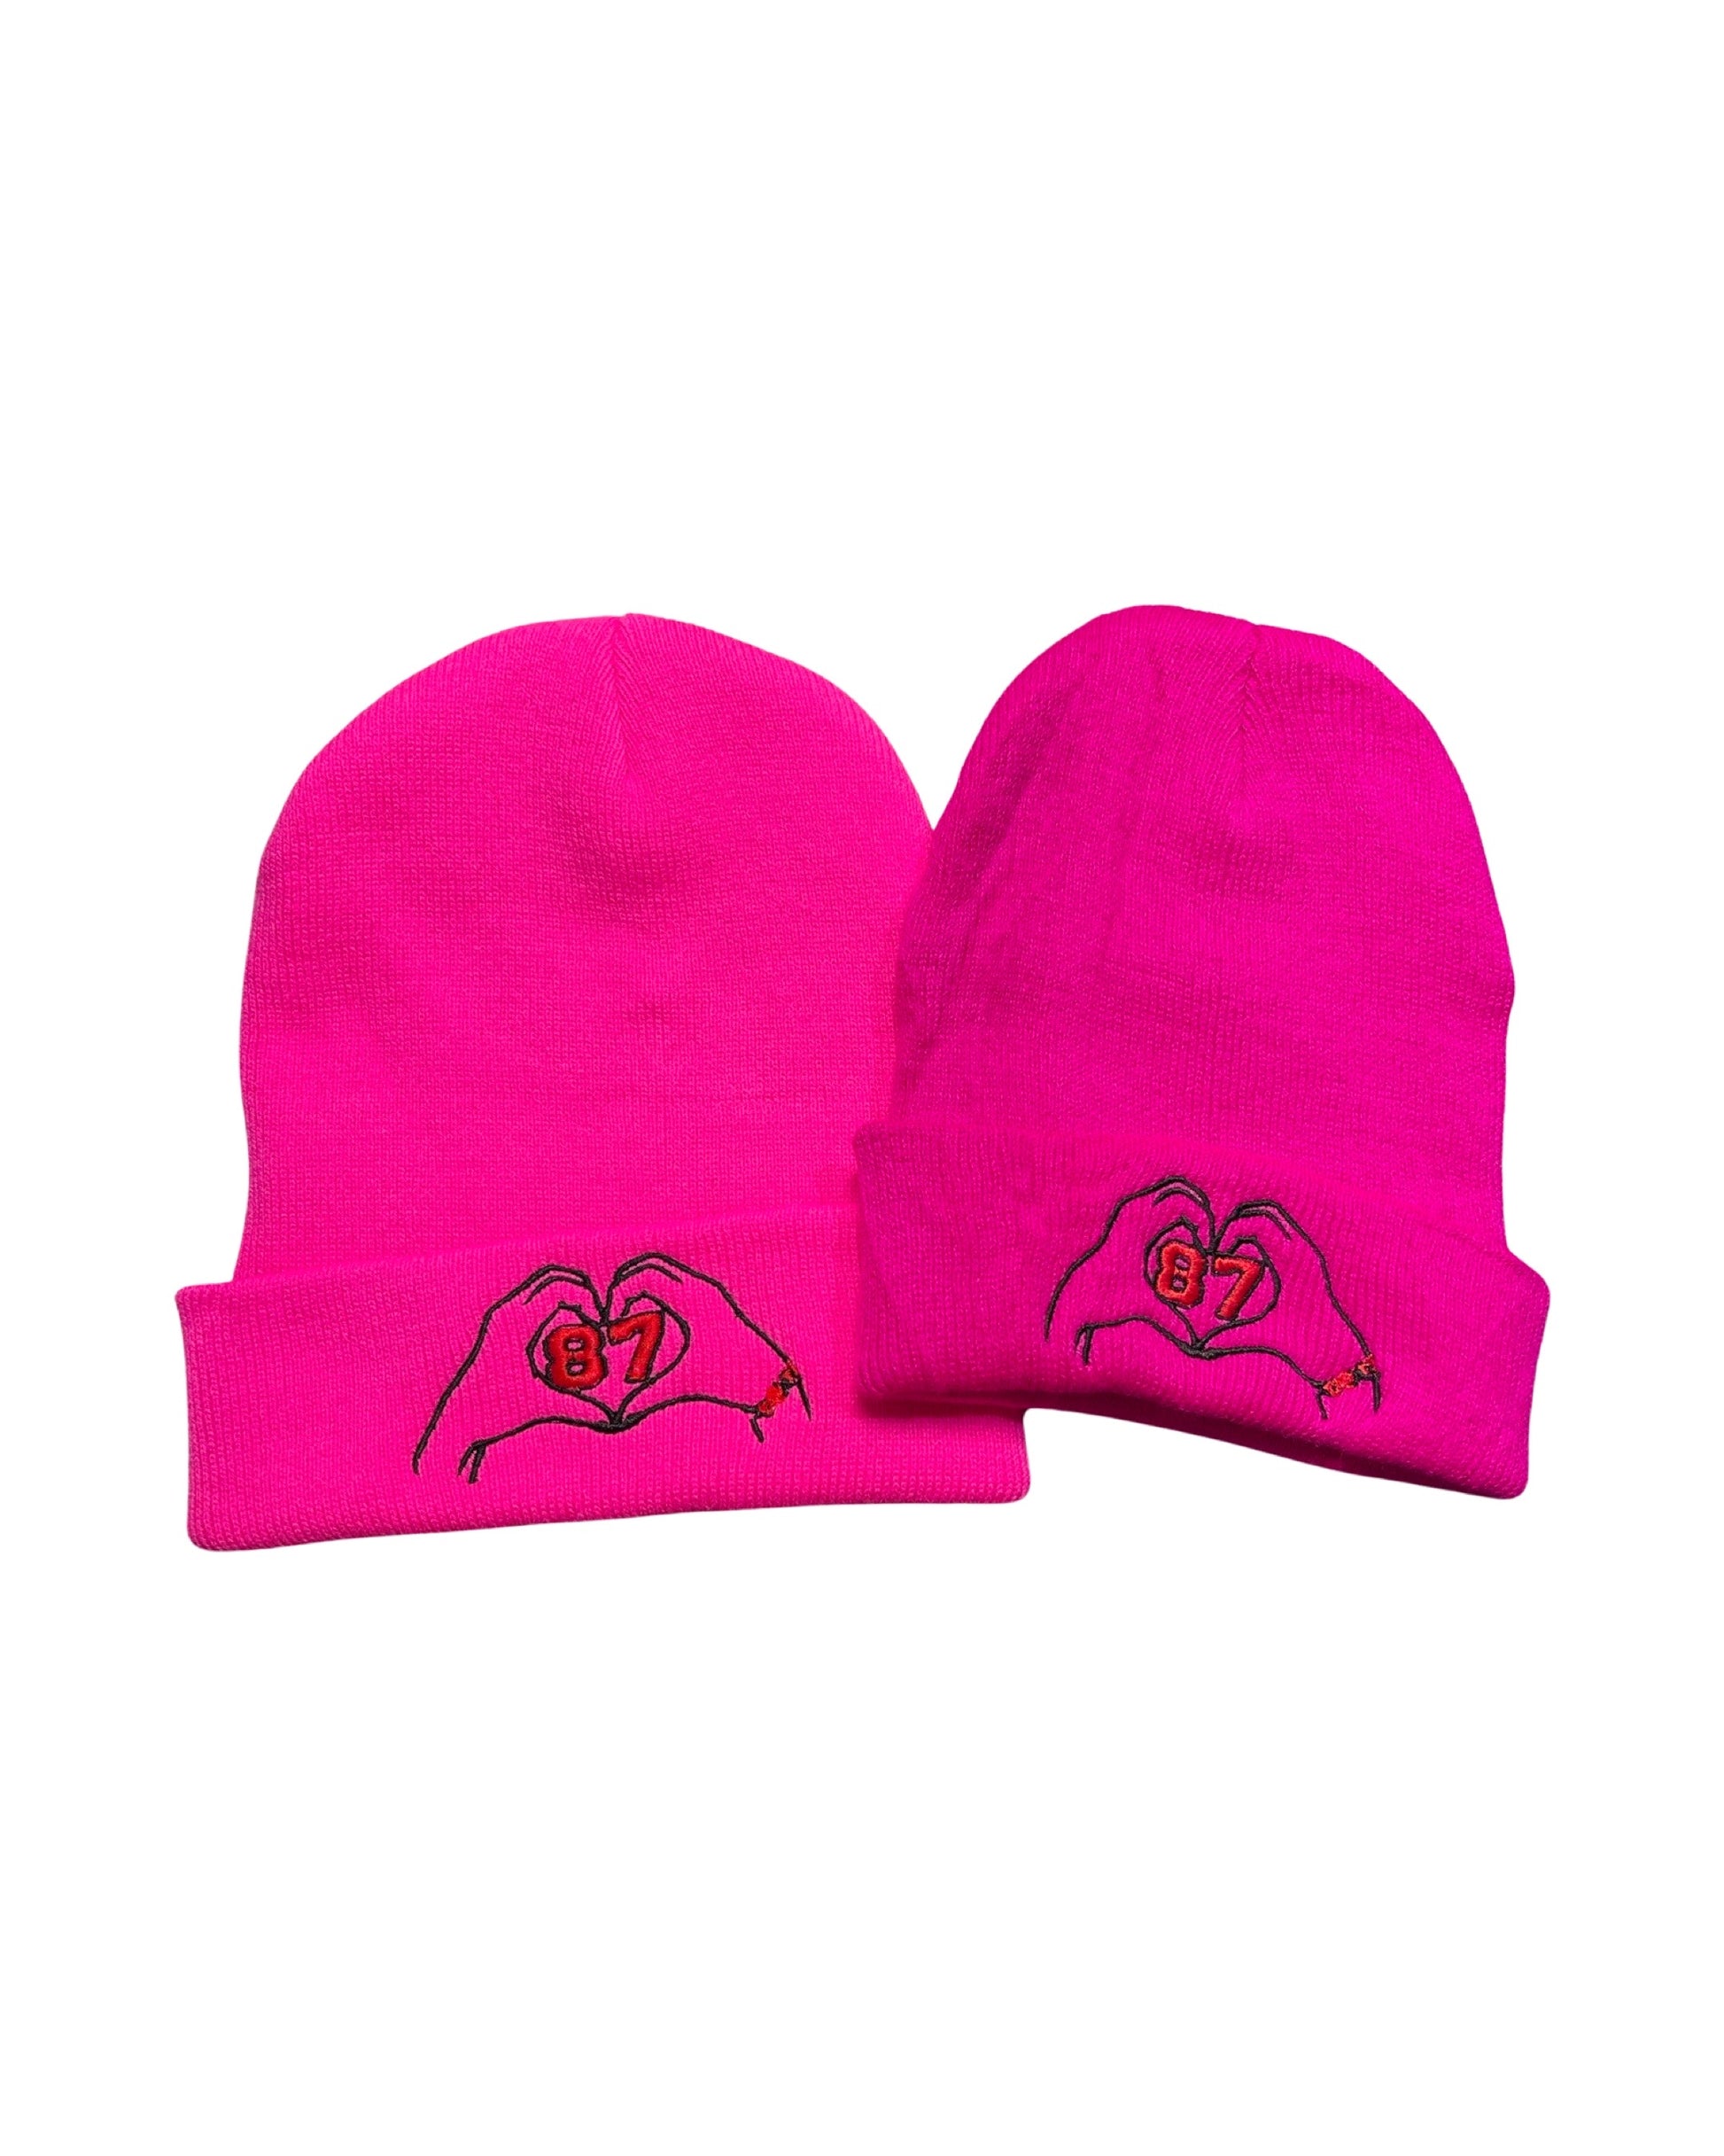 picture of adult and child size neon pink beanies embroidered with two hands forming a heart with the number 87 inside the heart